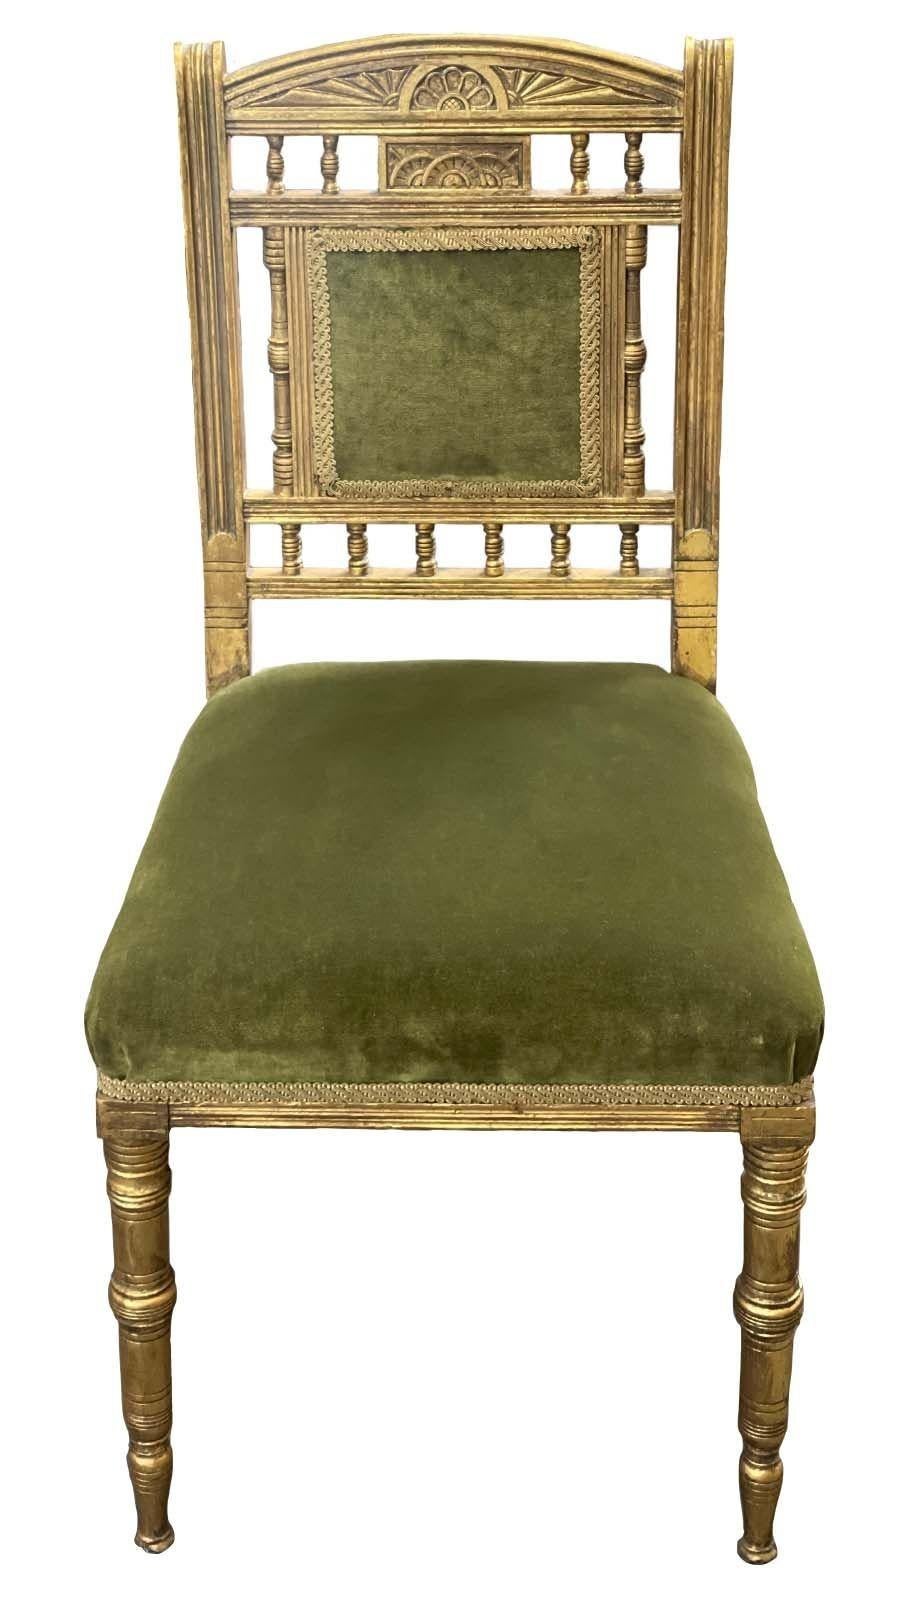 Set of five American gilt wood and green velvet chairs. circa 1920s.
Dimensions:
35